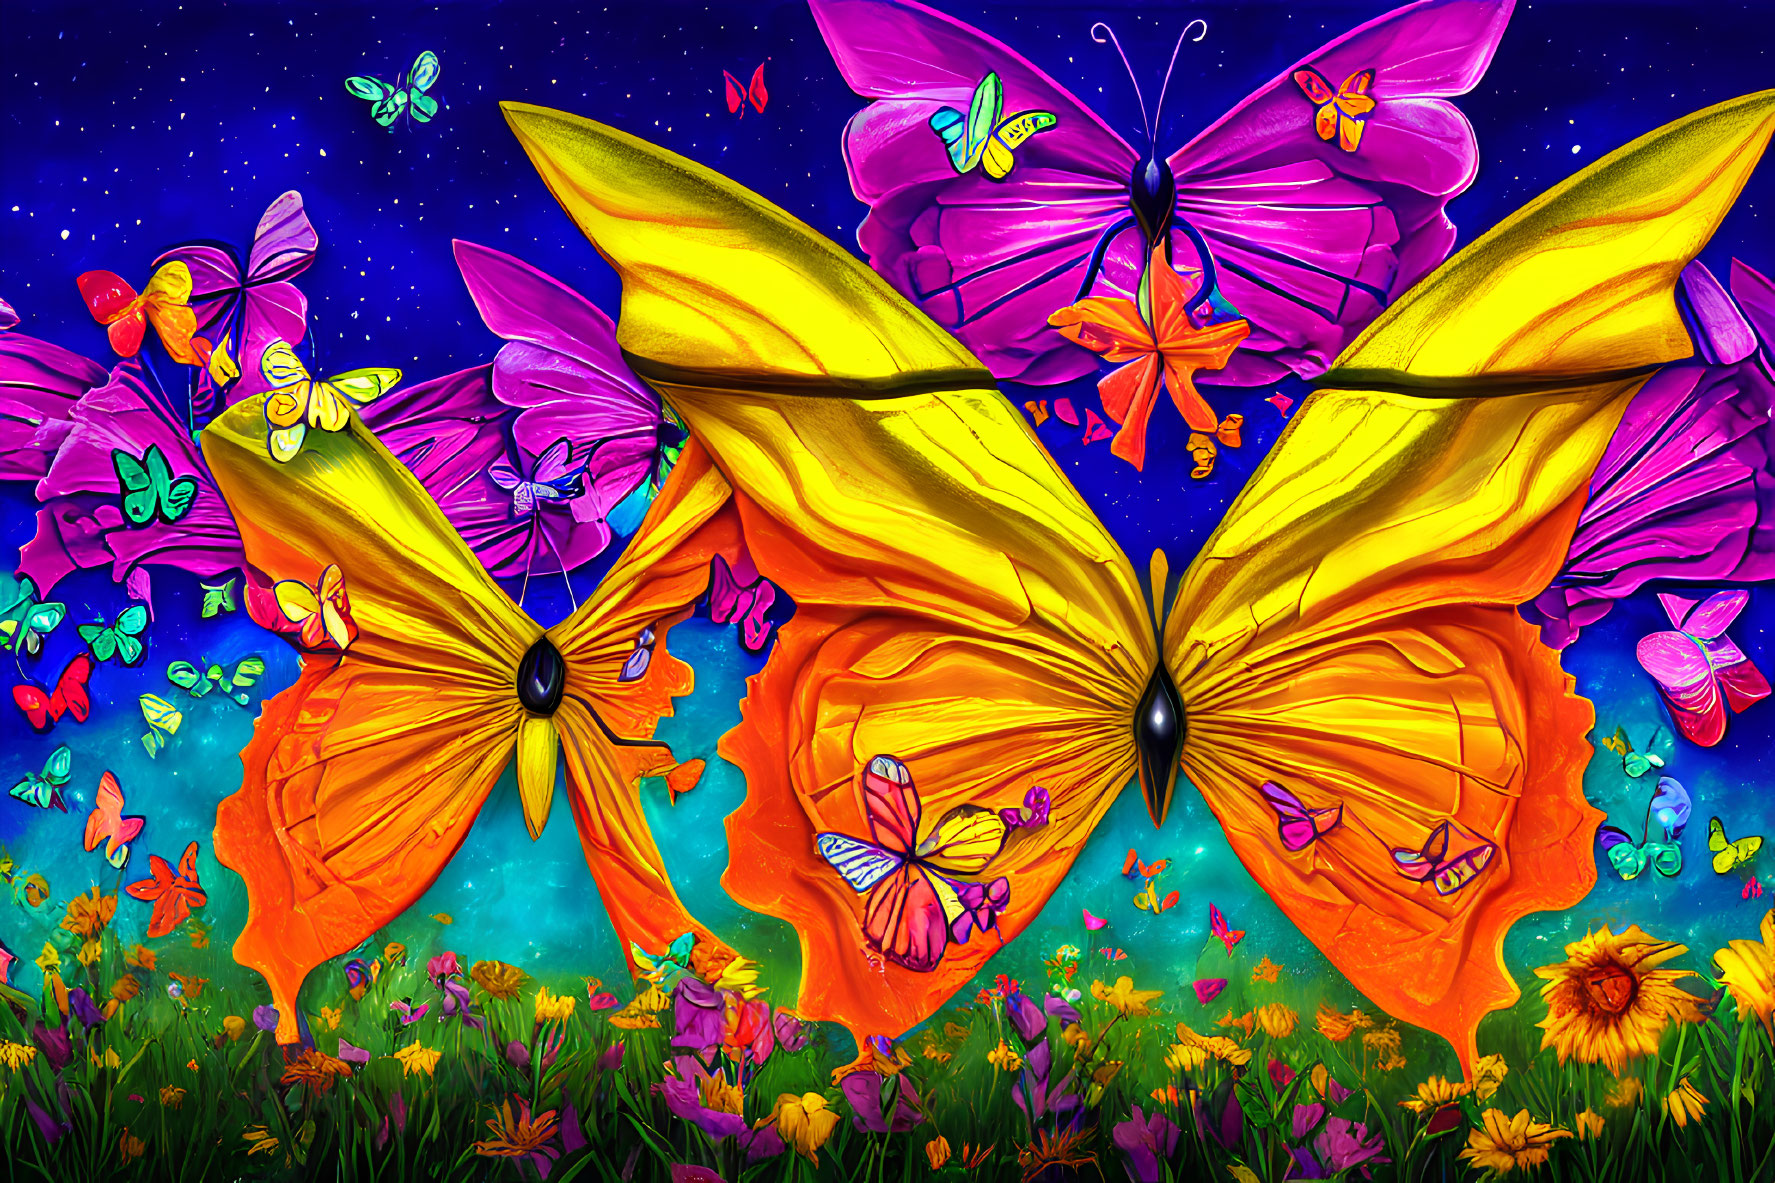 Colorful Butterfly Artwork with Flowers and Starry Sky